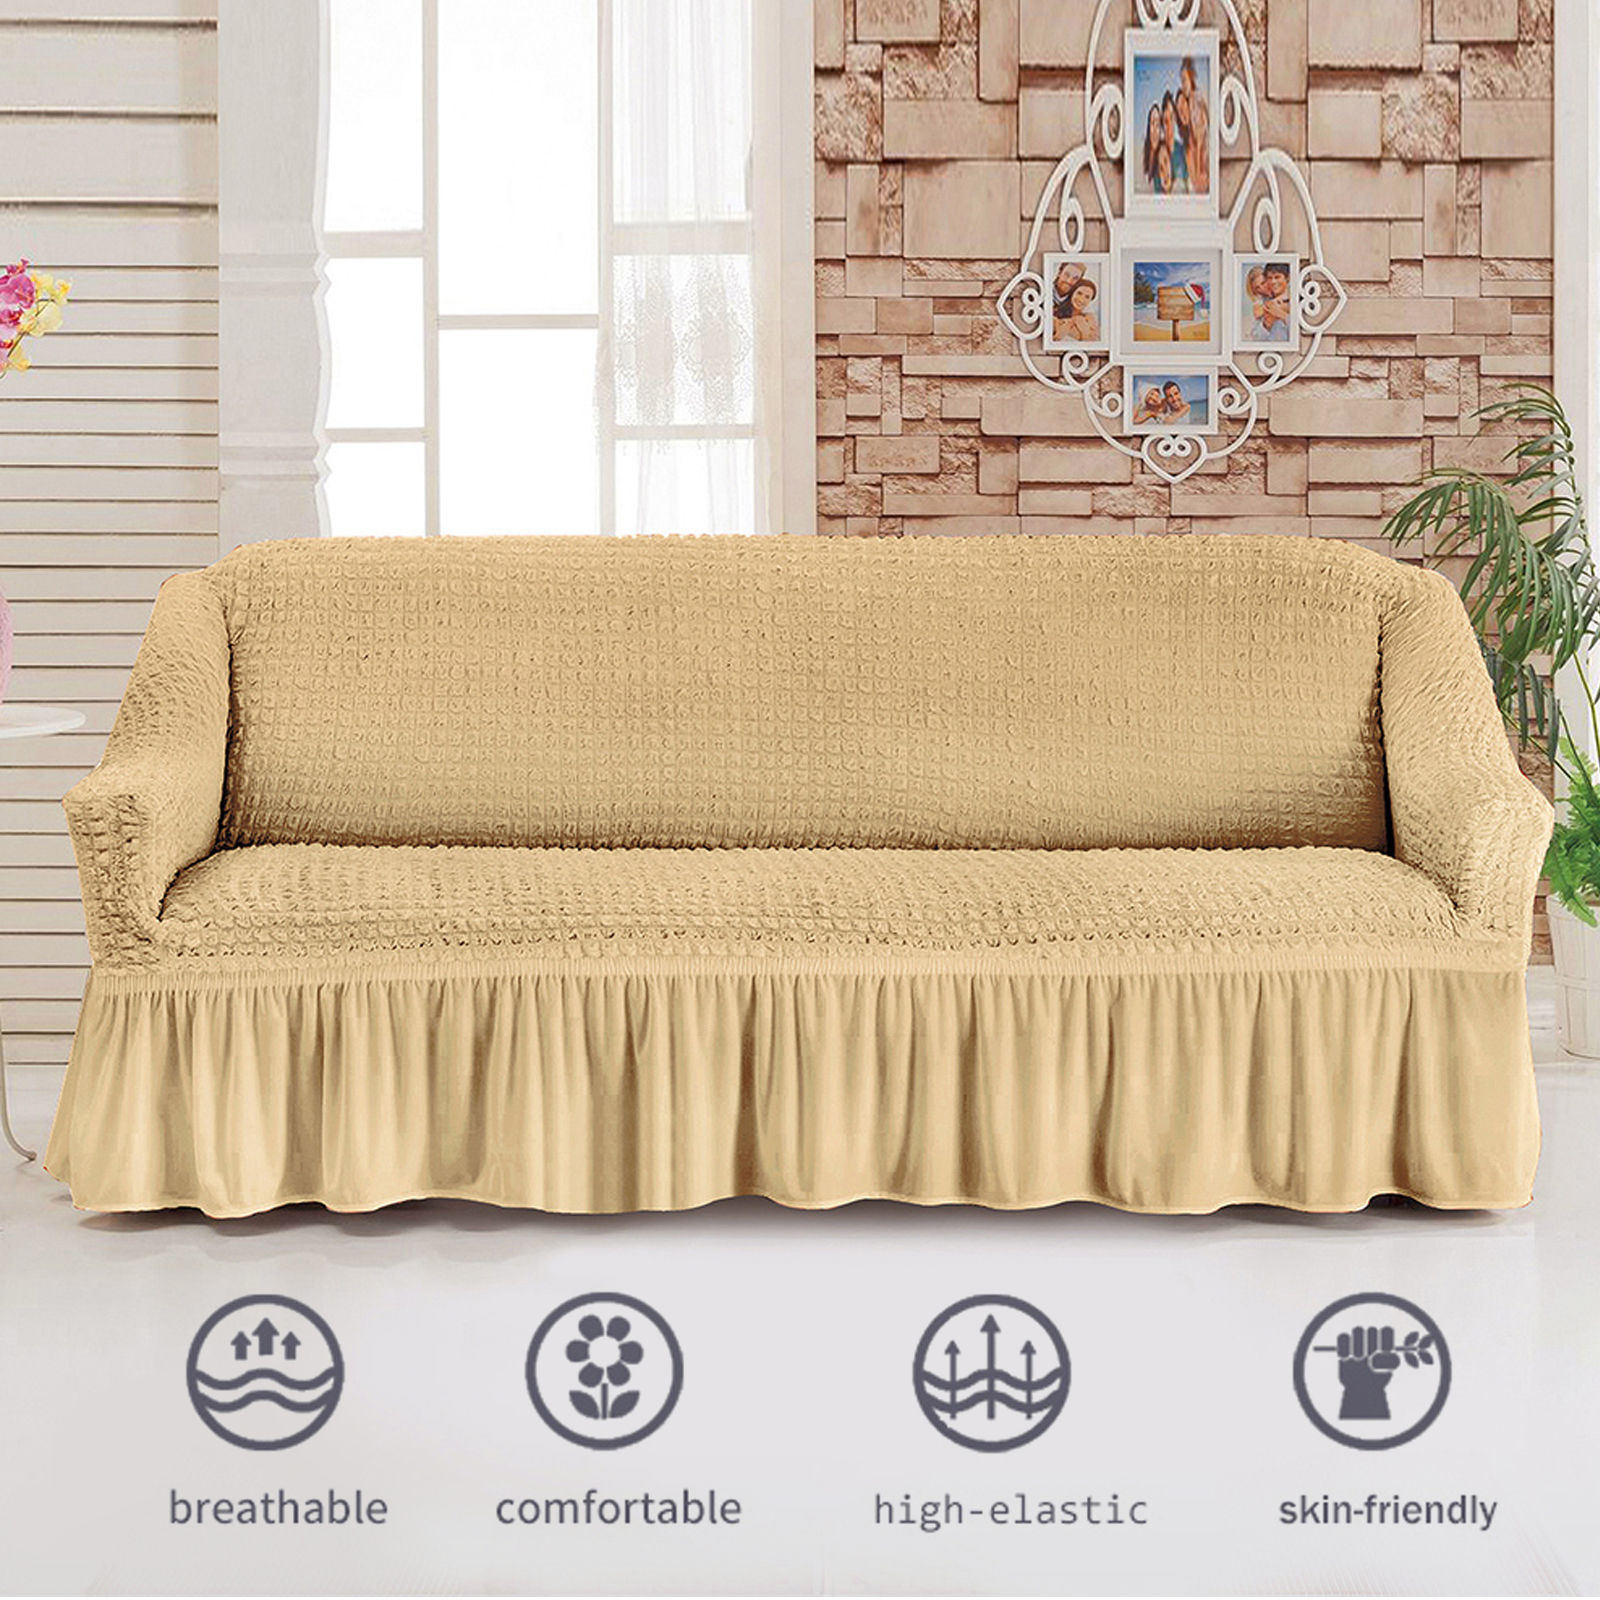 Stretch Sofa Slipcover, 3 Seater Sofa Slipcovers With Skirt With Armless Soft Sofa Cover Elastic Straps Sofa Slipcover For Living Room Kids Pets-Yellow A-Large